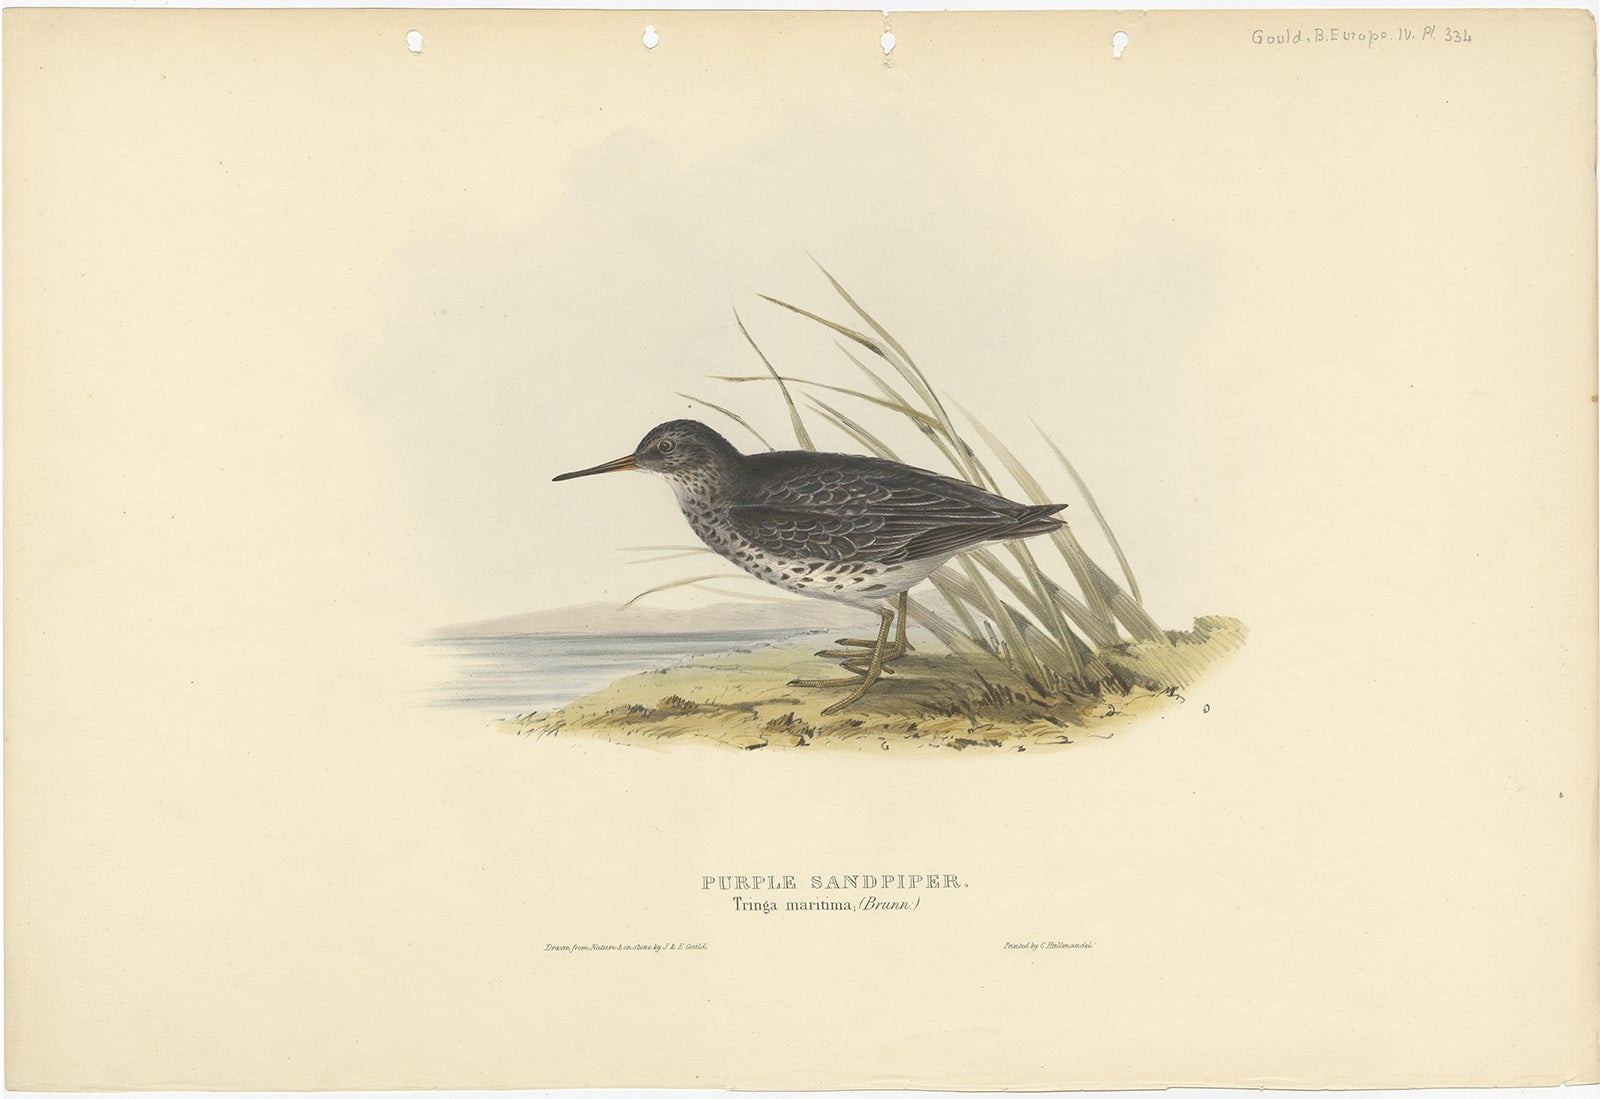 Antique bird print titled 'Purple Sandpiper'. Old bird print depicting the purple sandpiper. This print originates from 'Birds of Europe' by J. Gould (1832-1837). 

Artists and Engravers: John Gould (1804 - 1881) was an English ornithologist and